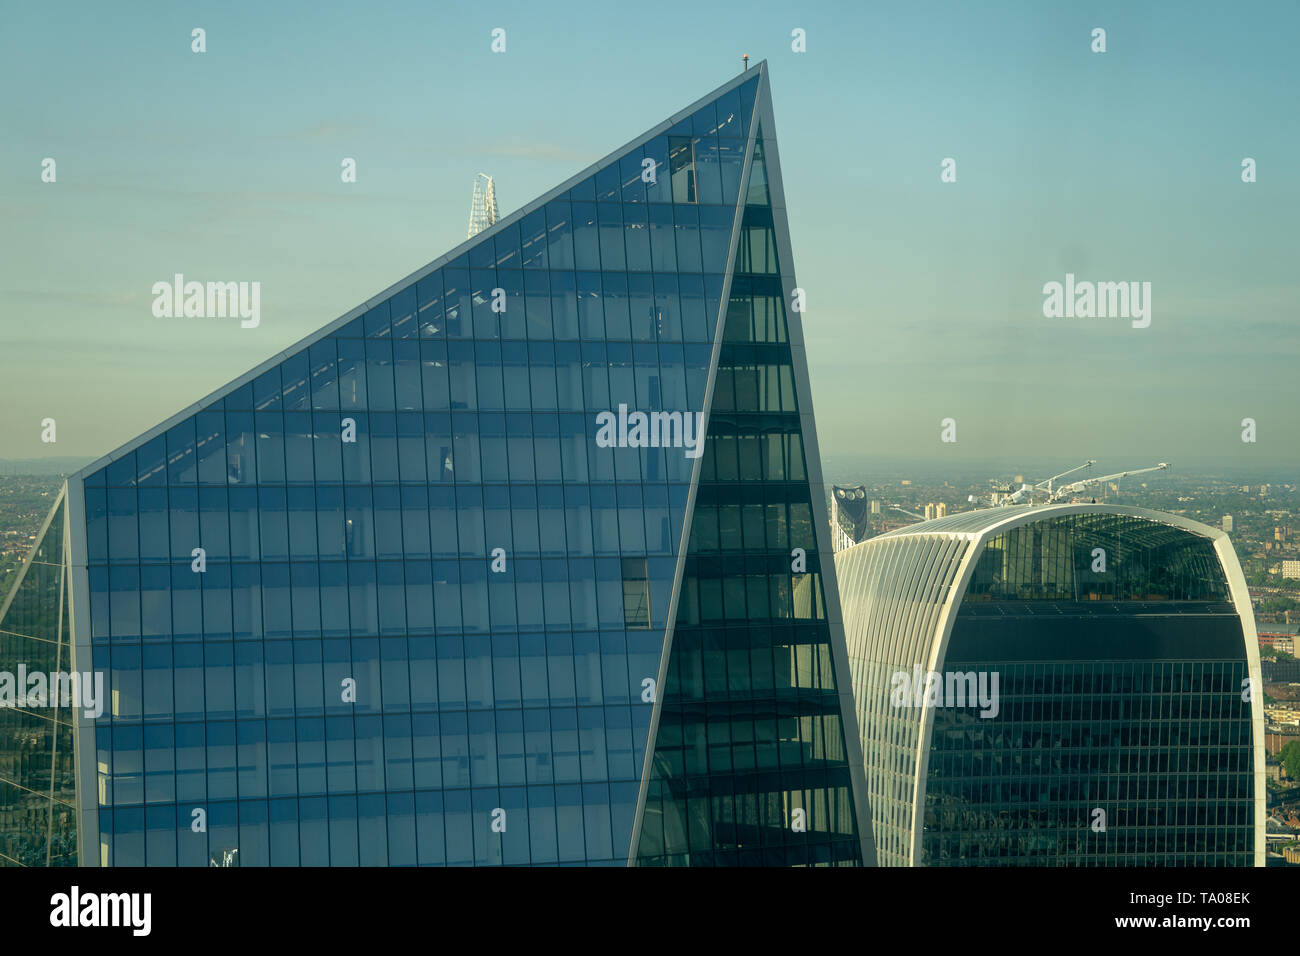 Views of office blocks in the City as seen from Searcys on the top floor of the Gherkin building in London. Photo date: Tuesday, May 21, 2019. Photo:  Stock Photo